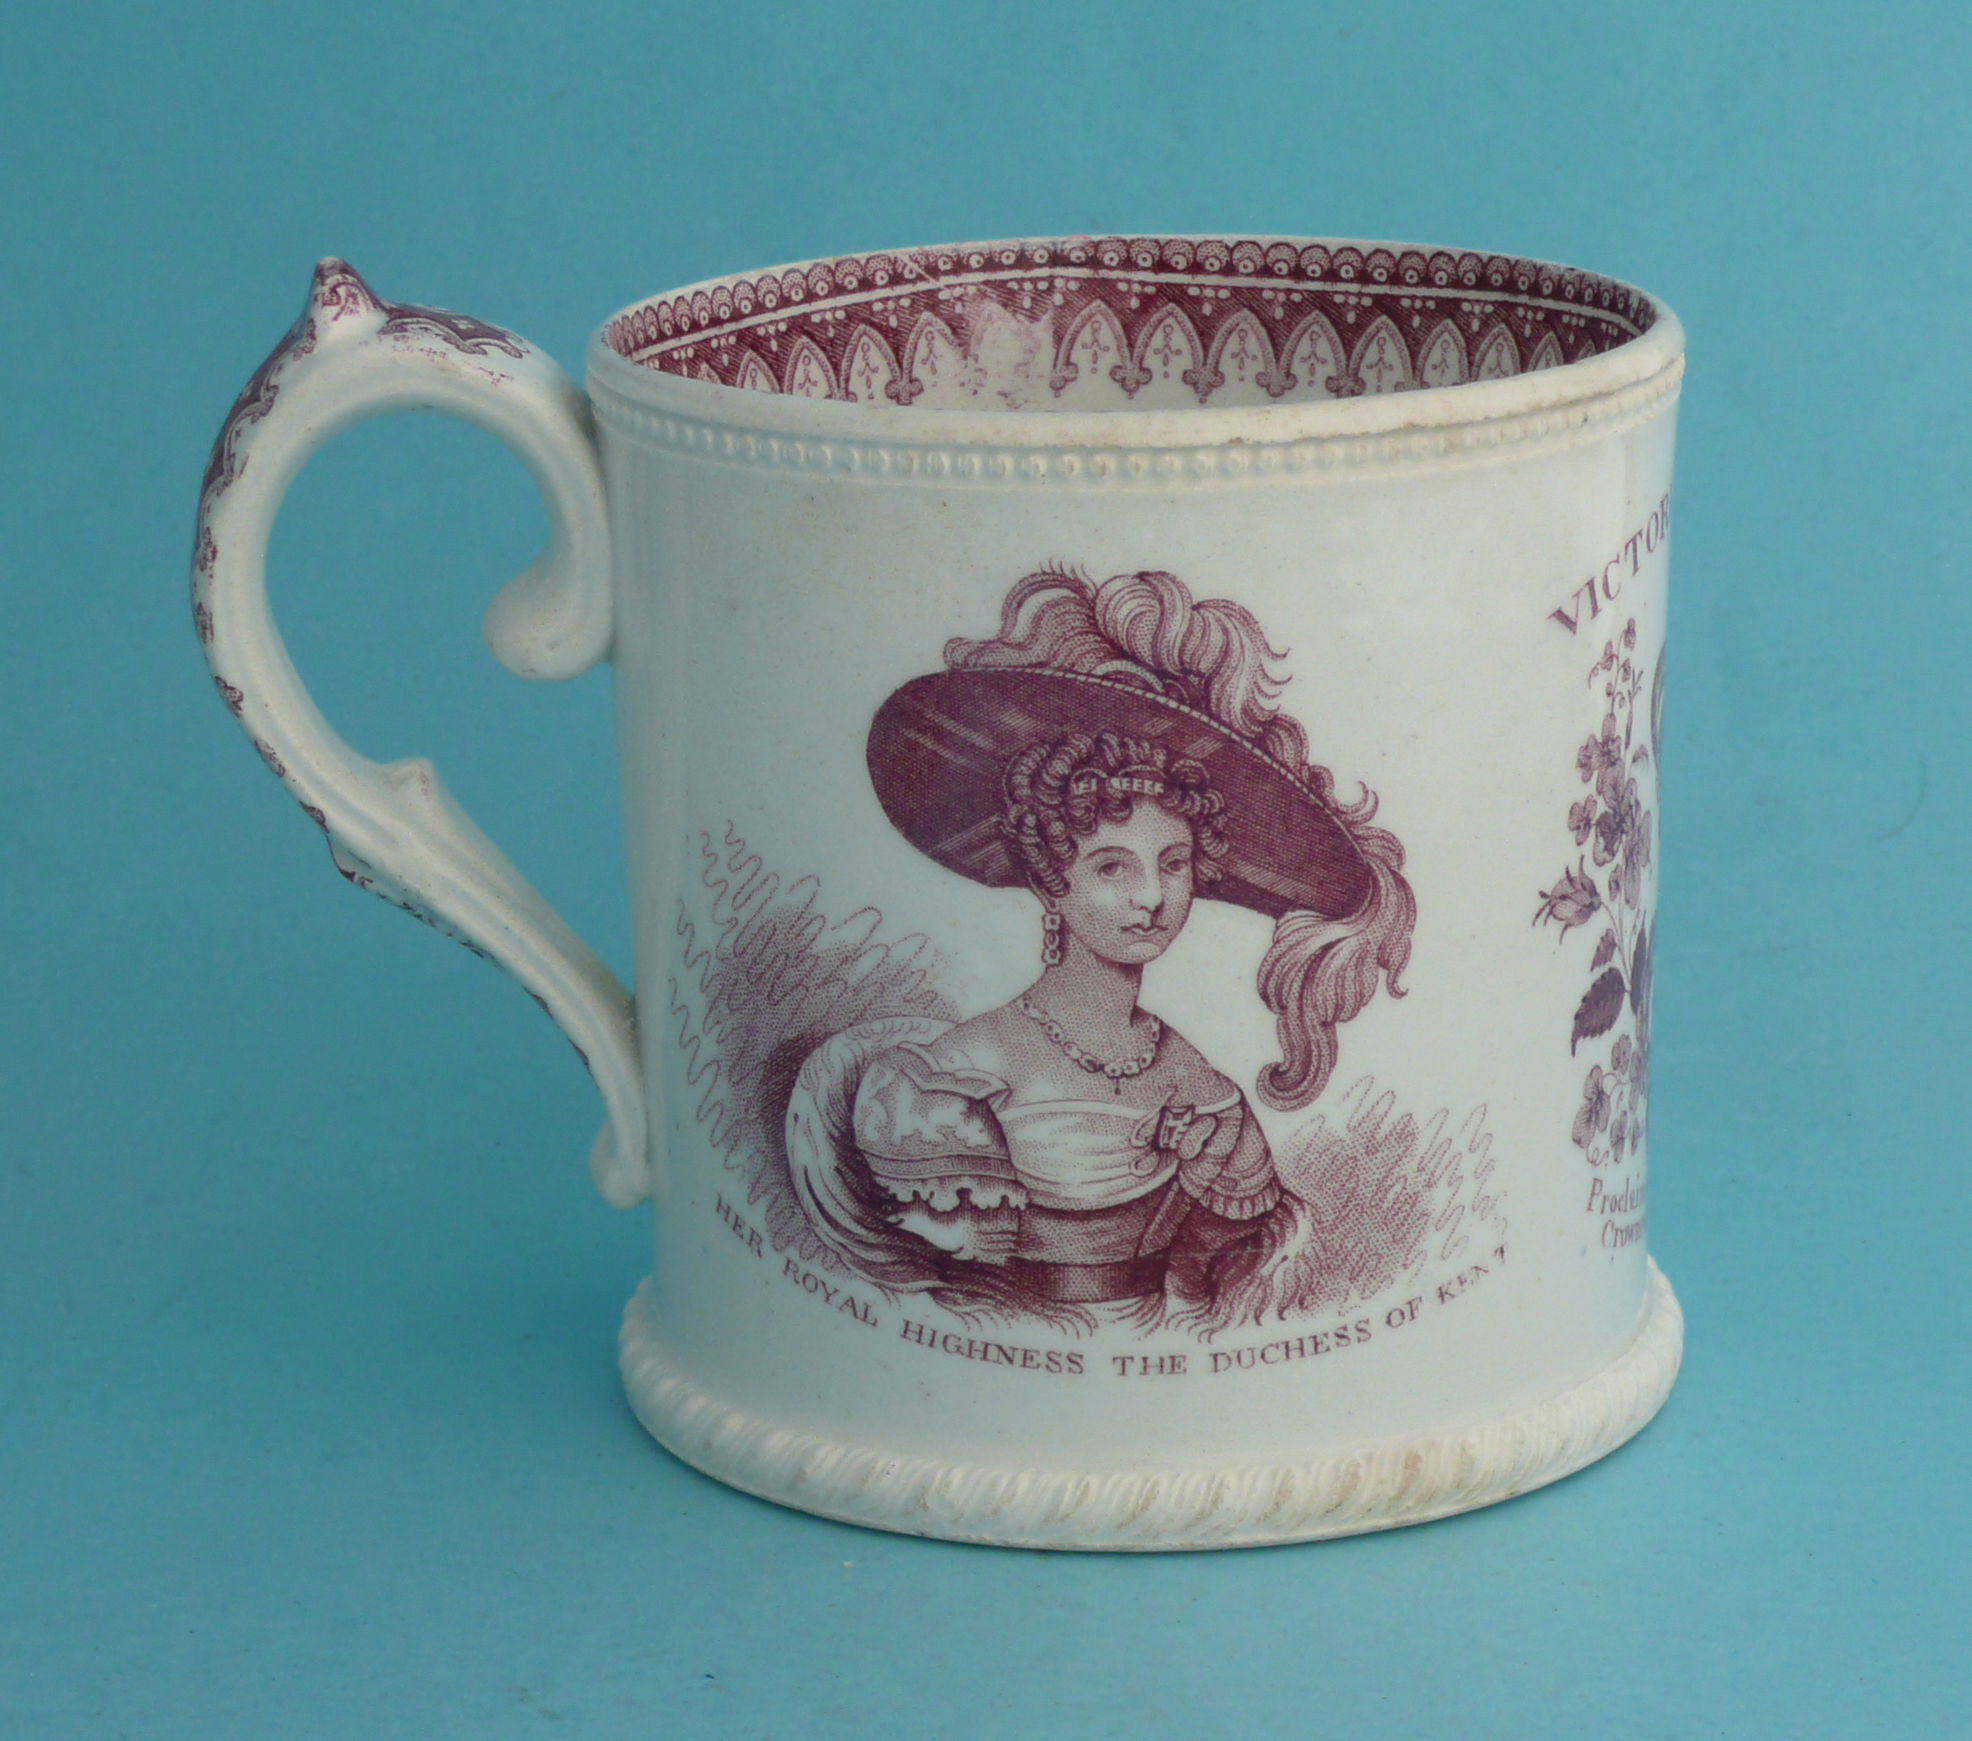 1838 Coronation: a cylindrical pearlware mug by Read & Clementson printed in pink with portraits - Image 2 of 5